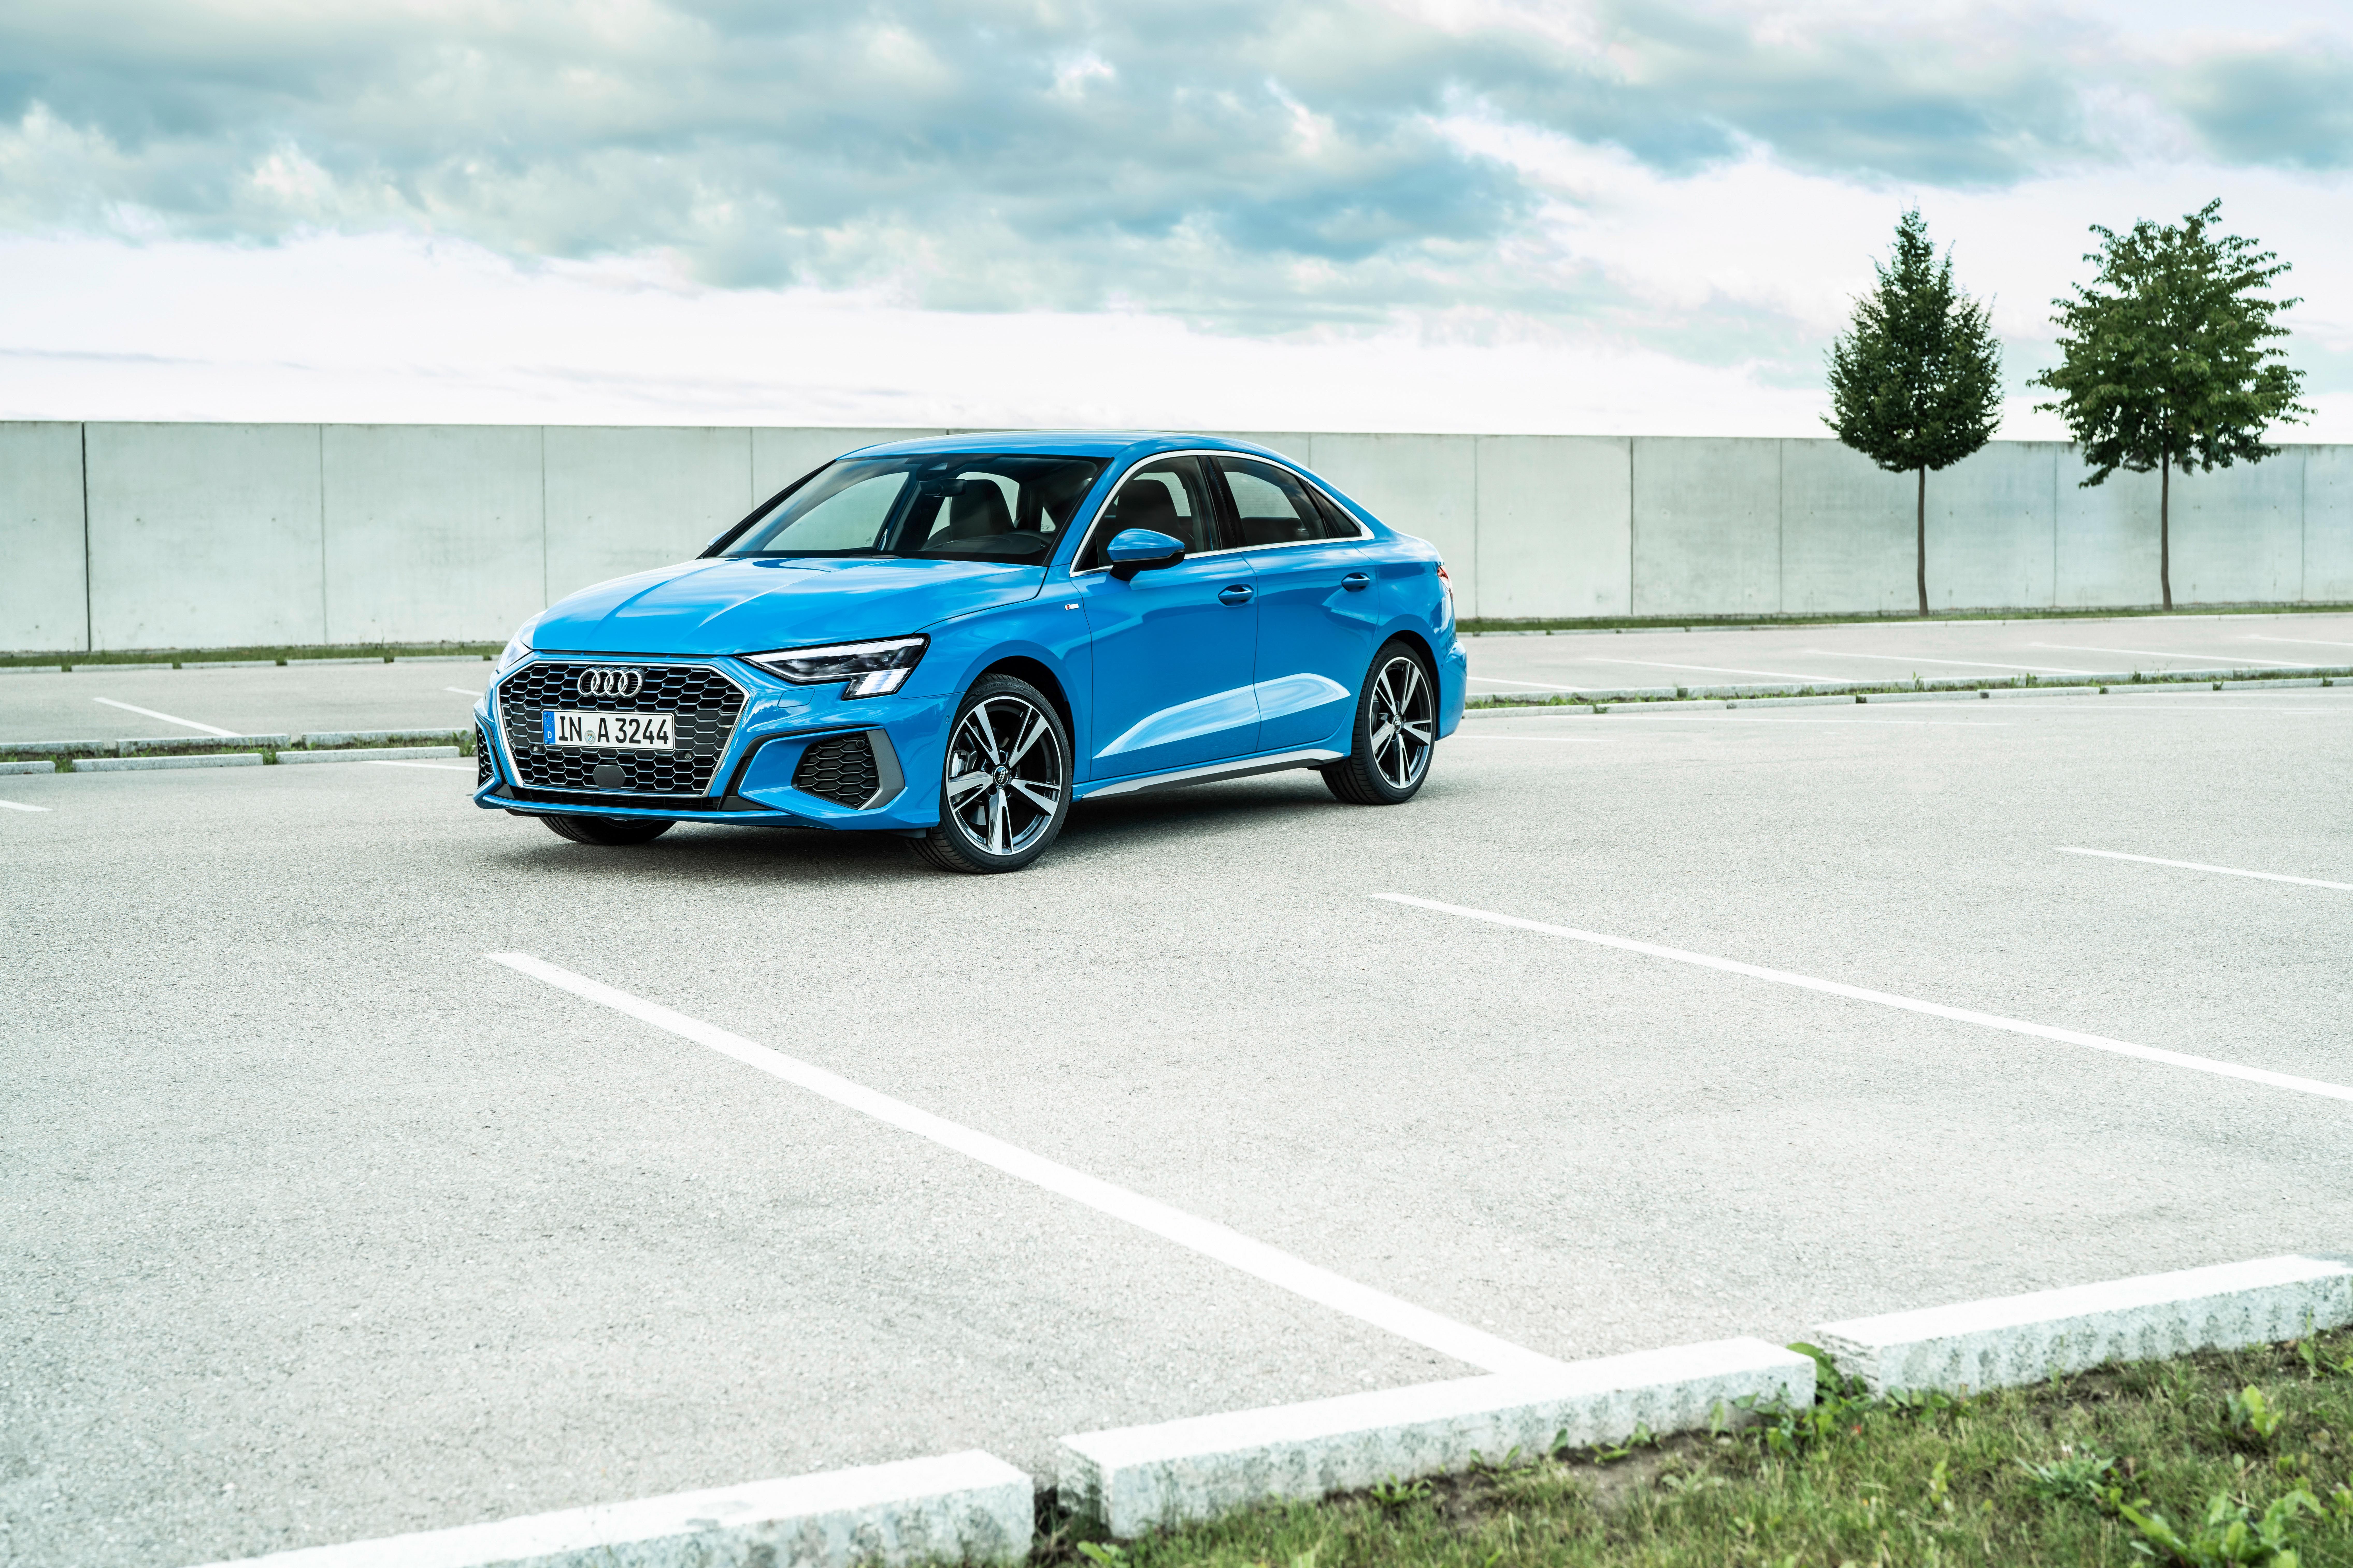 2022 Audi A3 And S3 Sedan Pricing Announced, Hot One Starts At $44,900